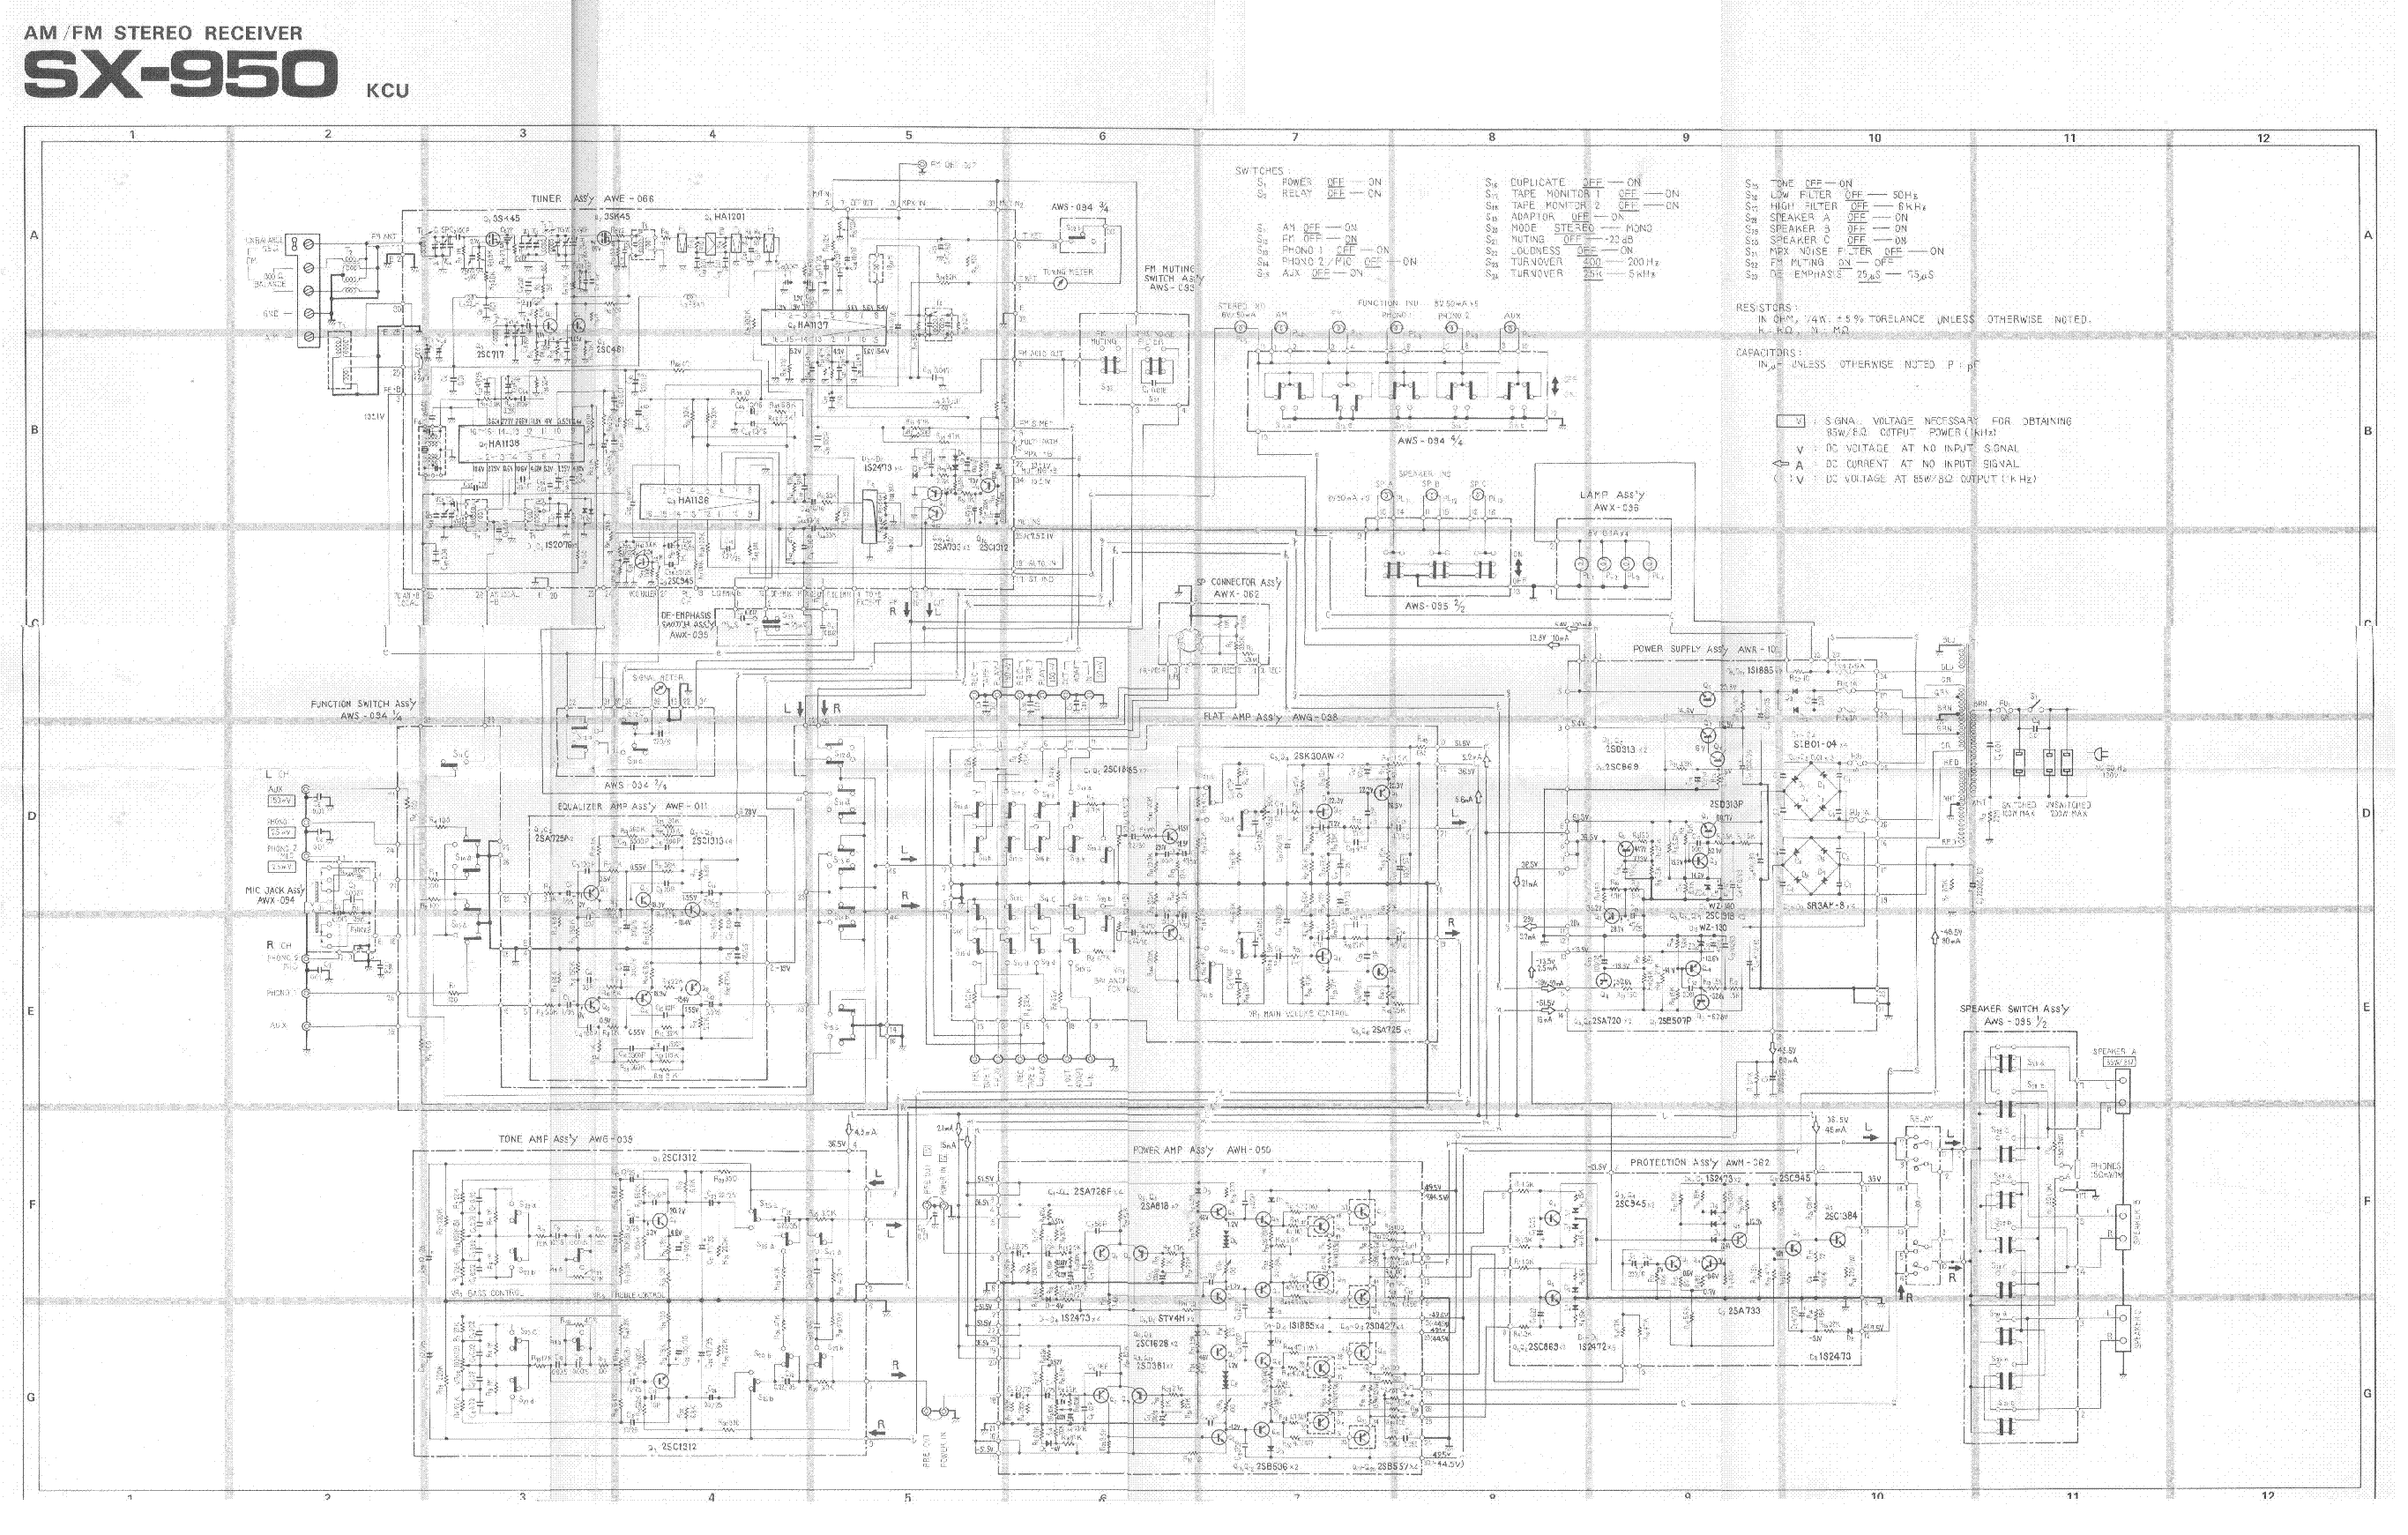 PIONEER SX-950 SM service manual (2nd page)